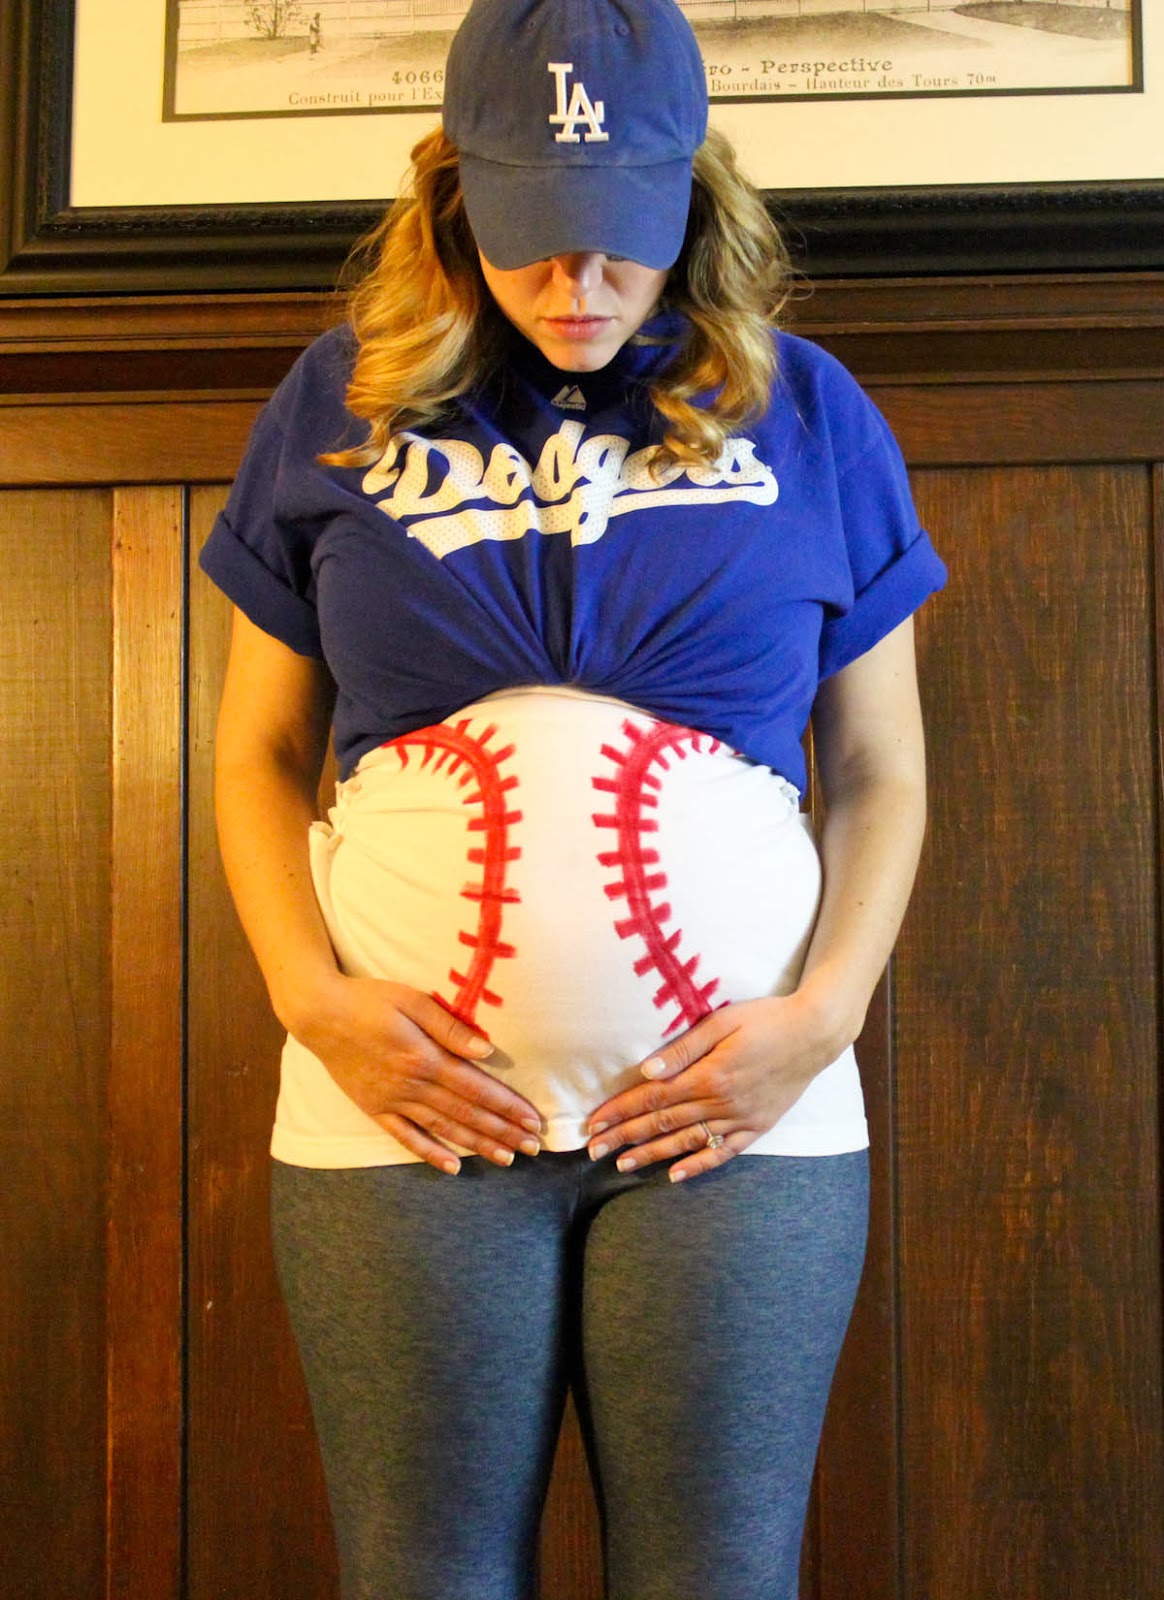 From Dahlias to Doxies DIY Pregnant Baseball and Umpire Costumes